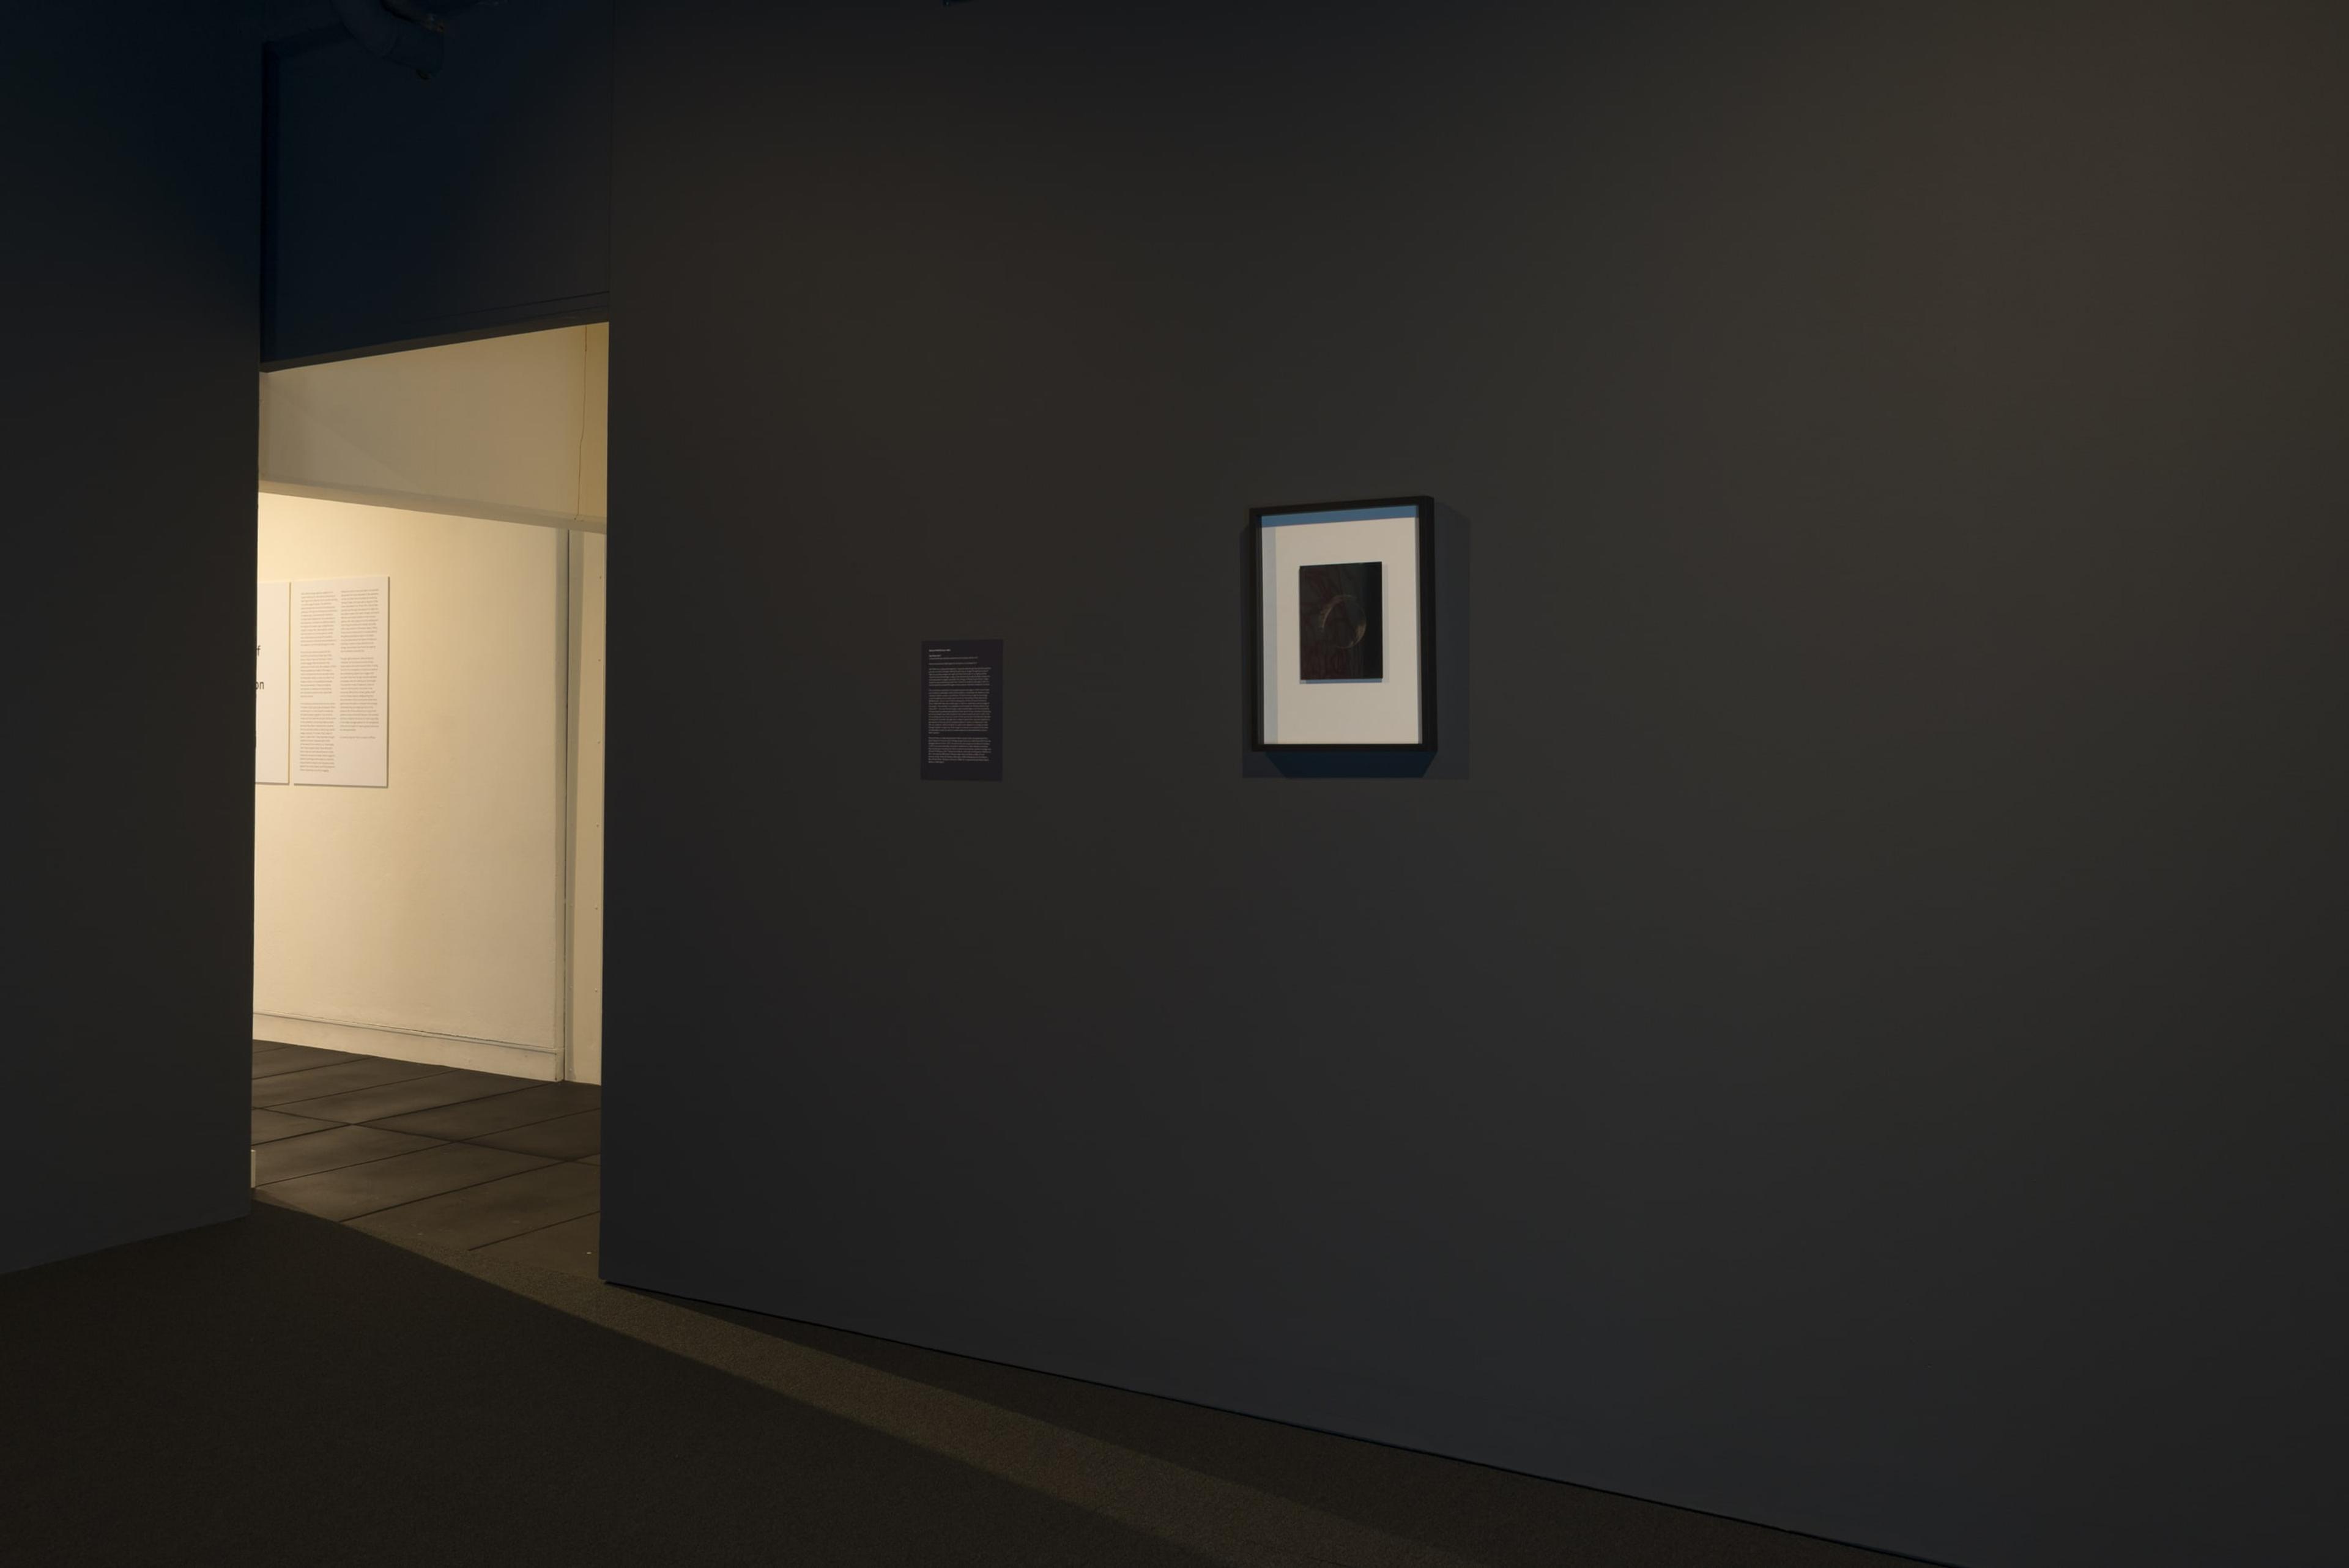 Installation view of Richard Frater, Not Titled, 2017, unique ambrotype (collodian positive print on glass), edition of 2, Victoria University of Wellington Art Collection, purchased 2017, in the exhibition Solid State: Works from the Victoria University of Wellington Art Collection, 6 October – 20 December 2018, Adam Art Gallery Te Pātaka Toi.